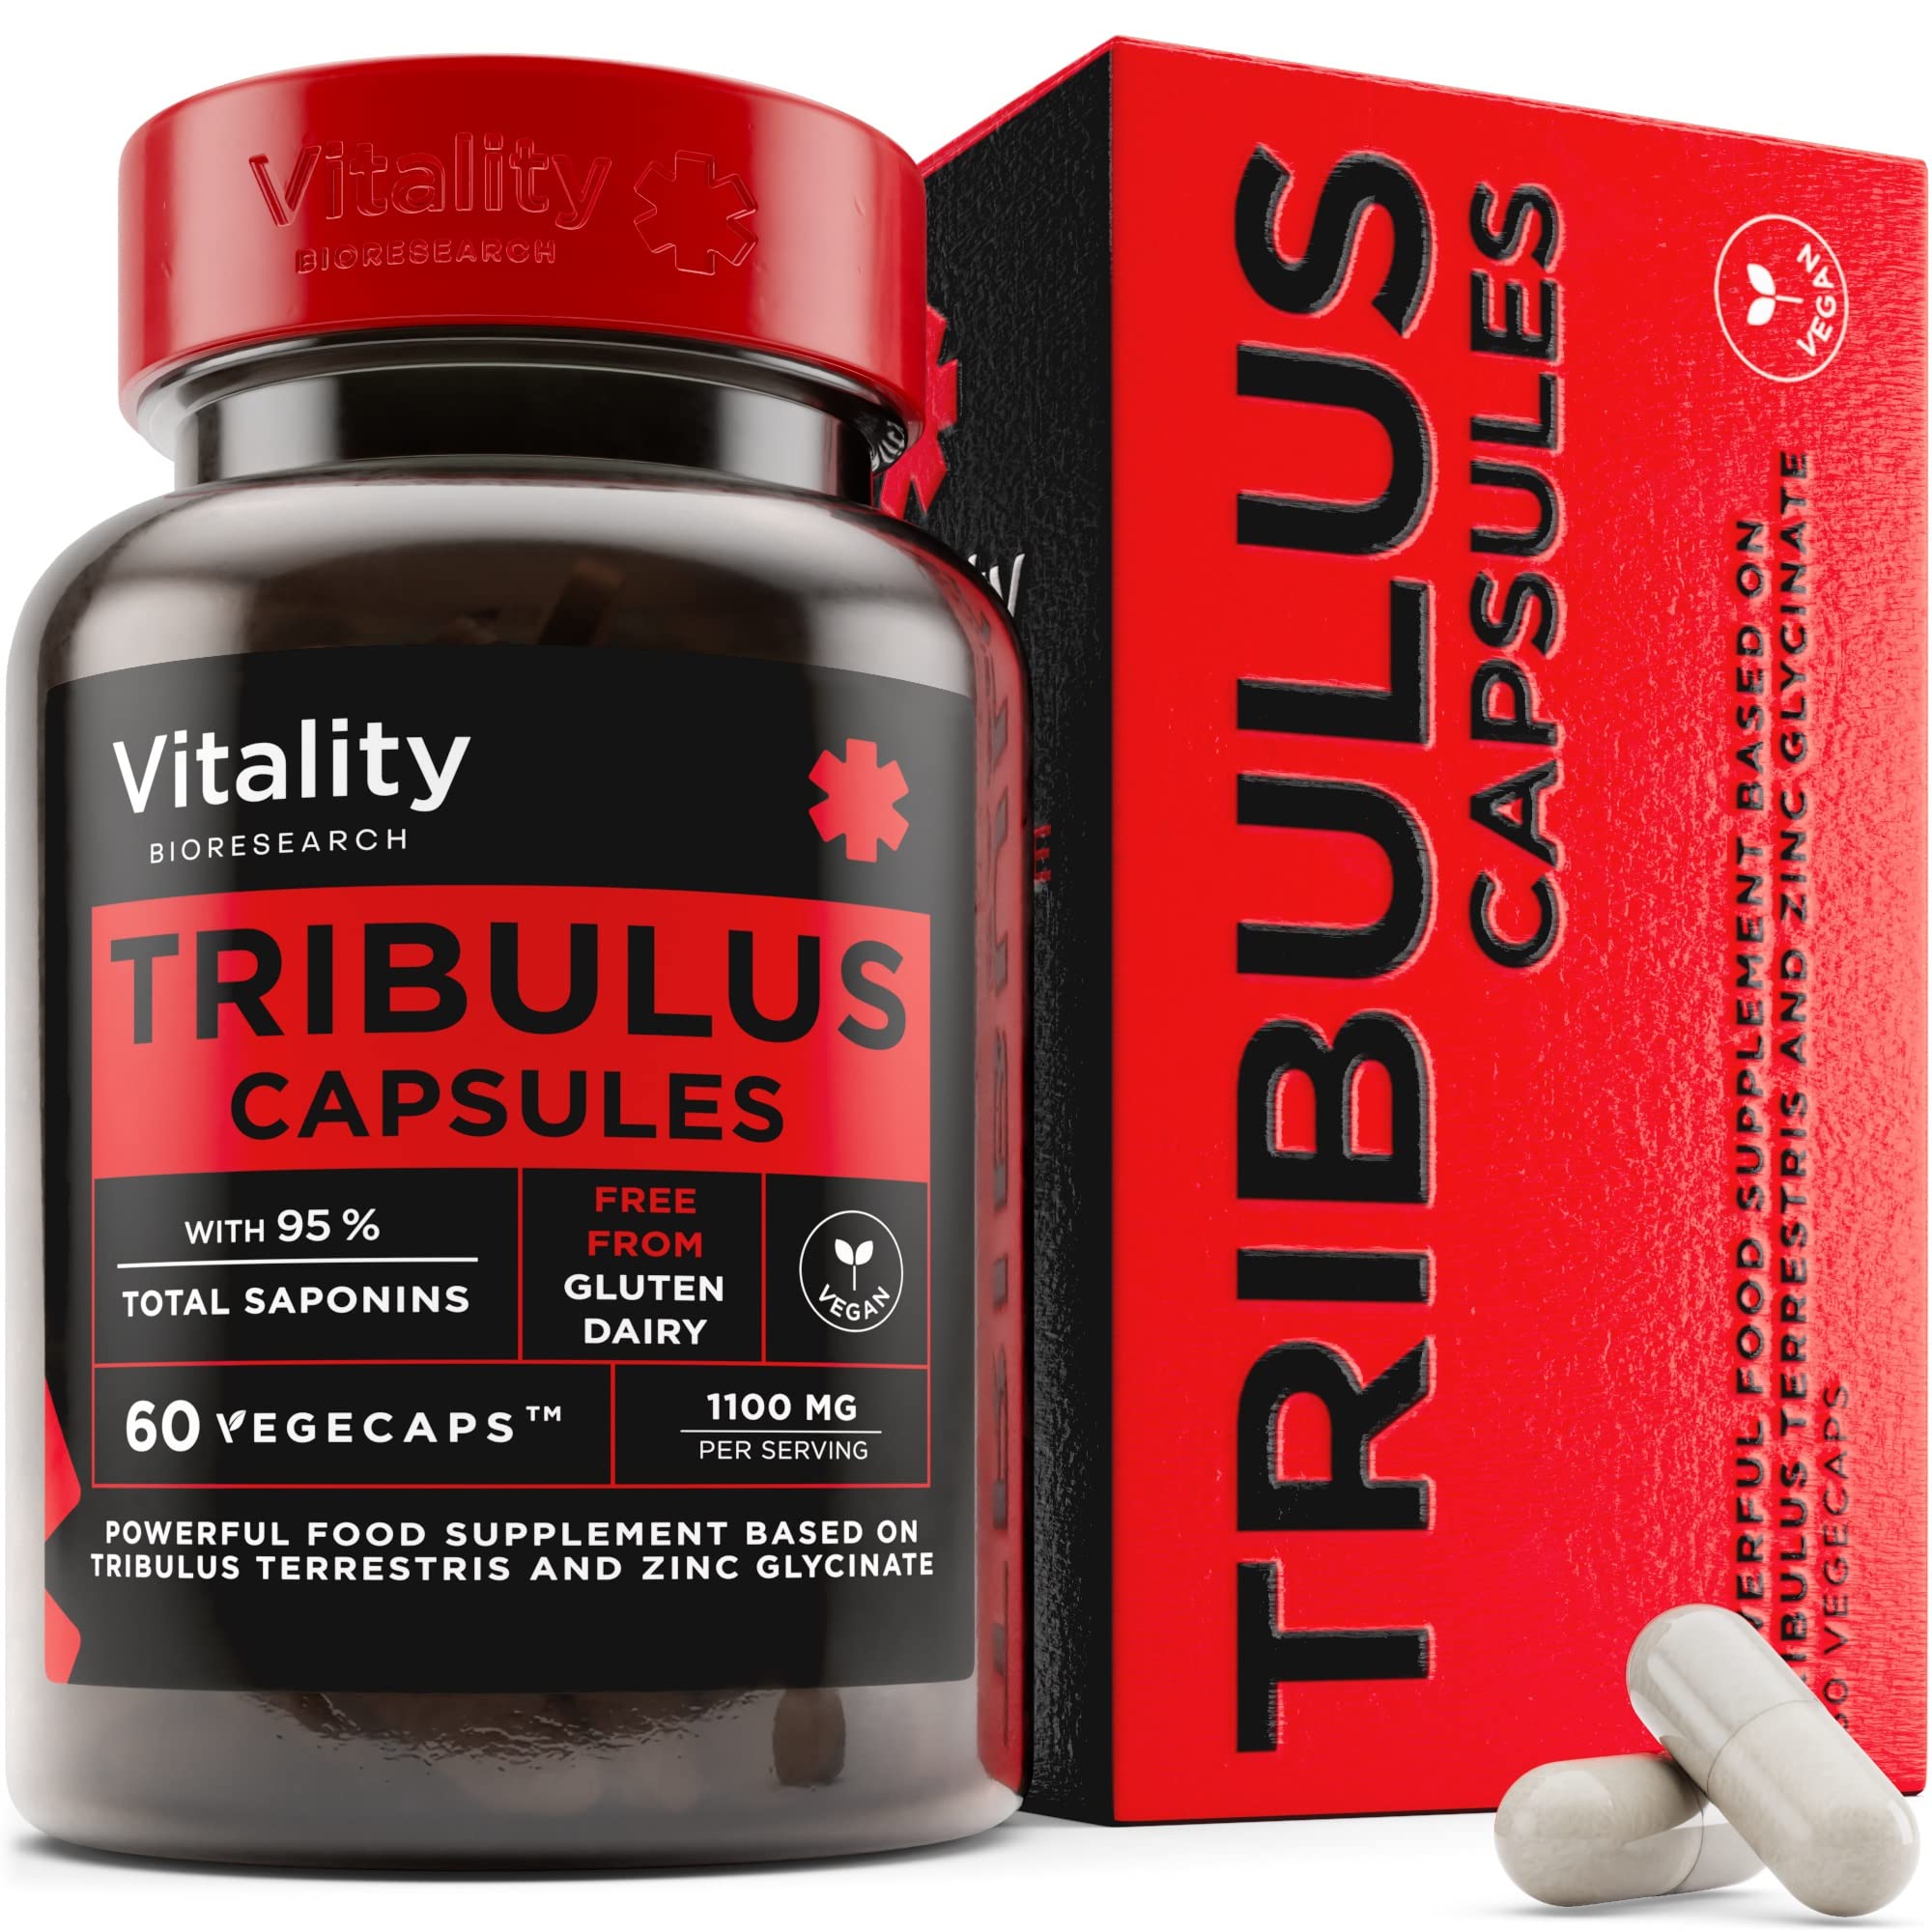 Vitality Bioresearch Tribulus Terrestris For Men Supplements 1100mg With Zinc Glycinate 3016